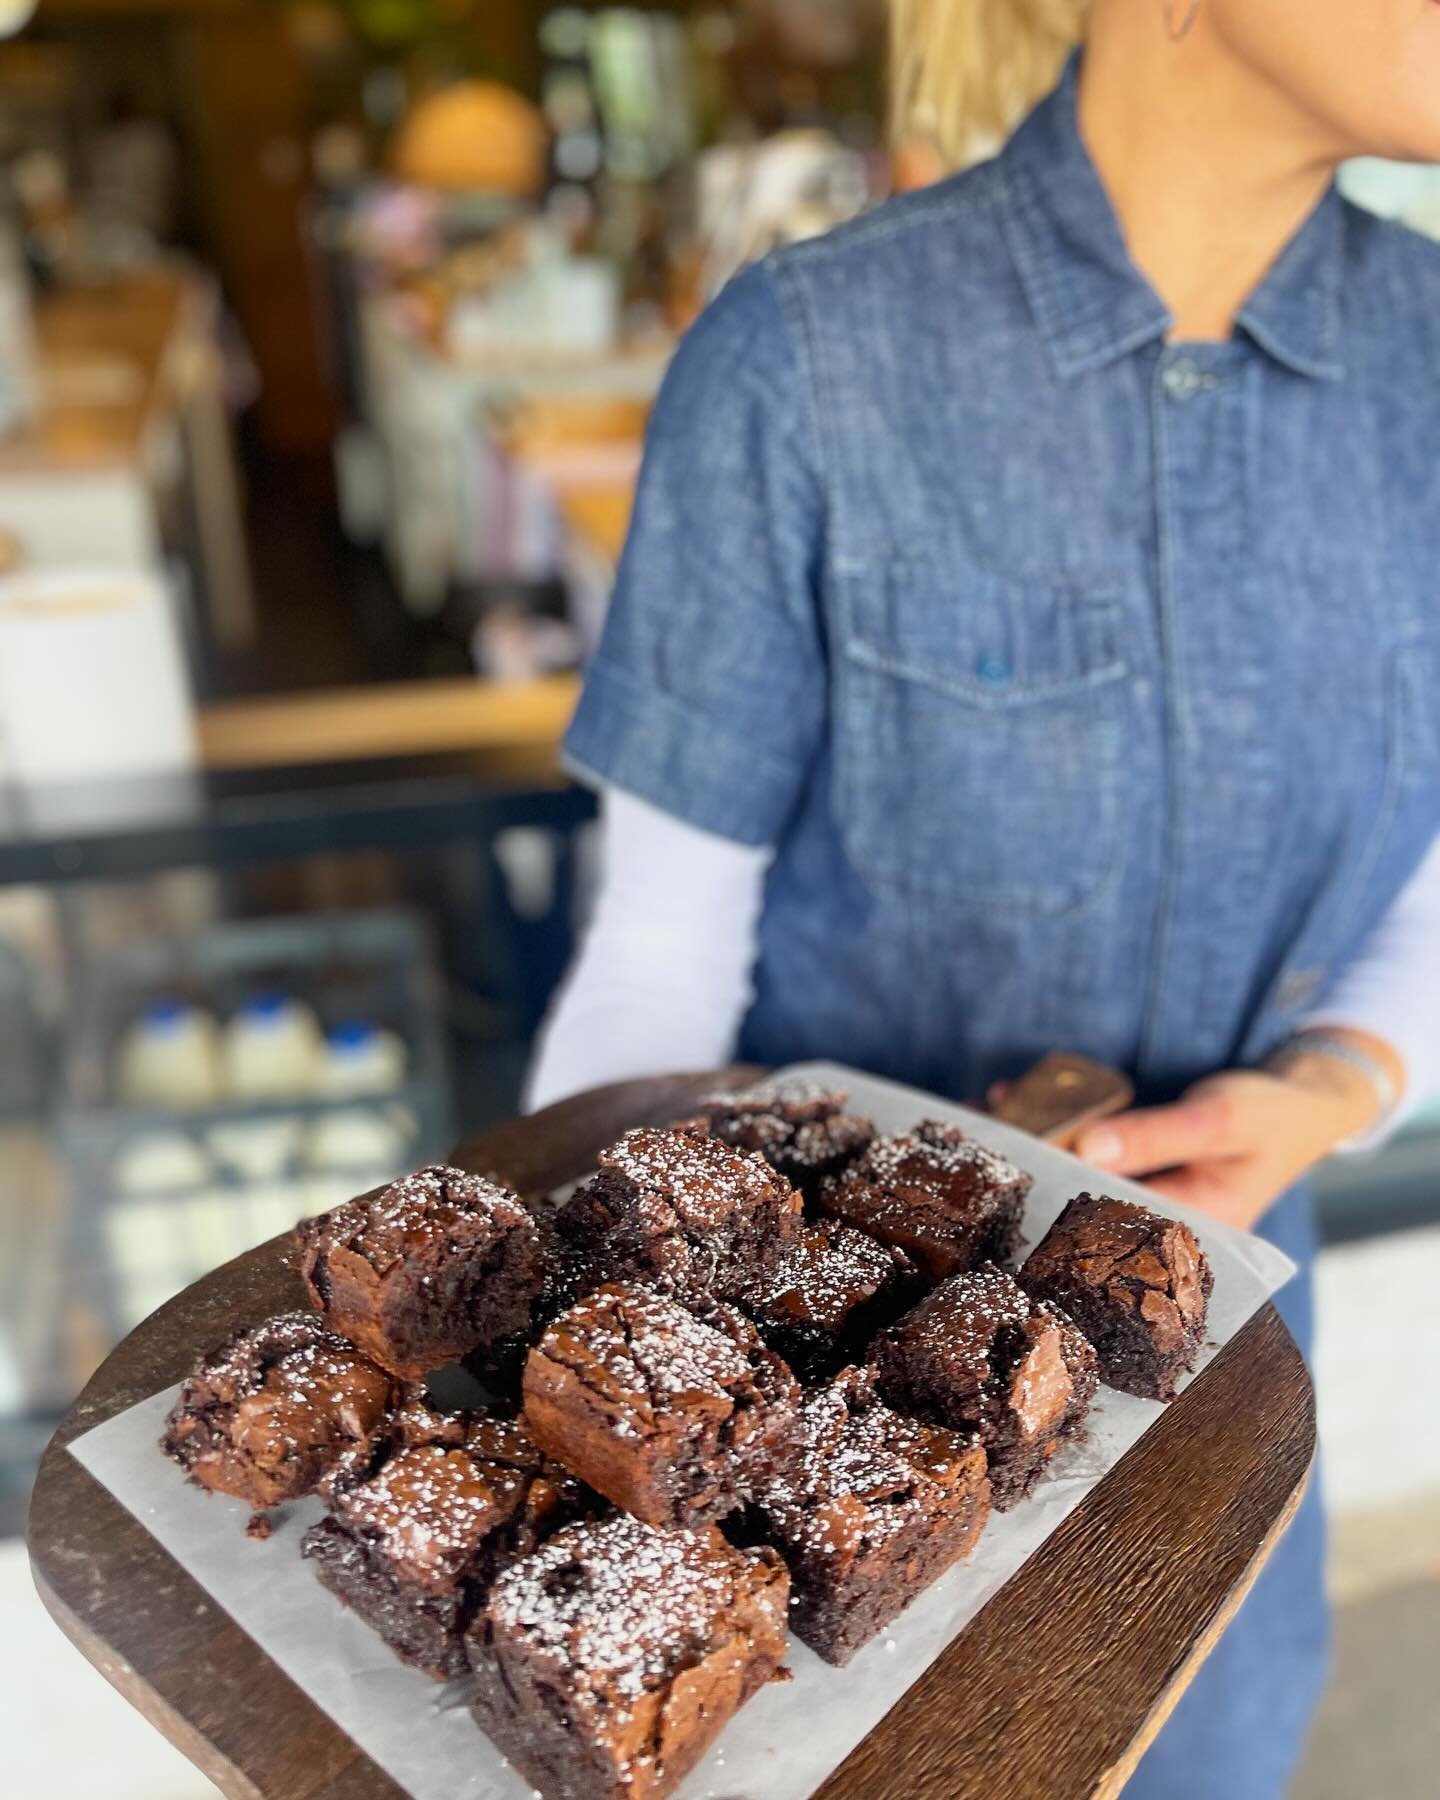 Baking on the weekends @citizen_cafe_ fresh brownies @danni_dodgson Molly there ready!!! 👌 pastries muffins always a must on weekends ❤️ ❤️ #muffins #pastries #sweets #baking #bakinglove #coffeetime #muffin